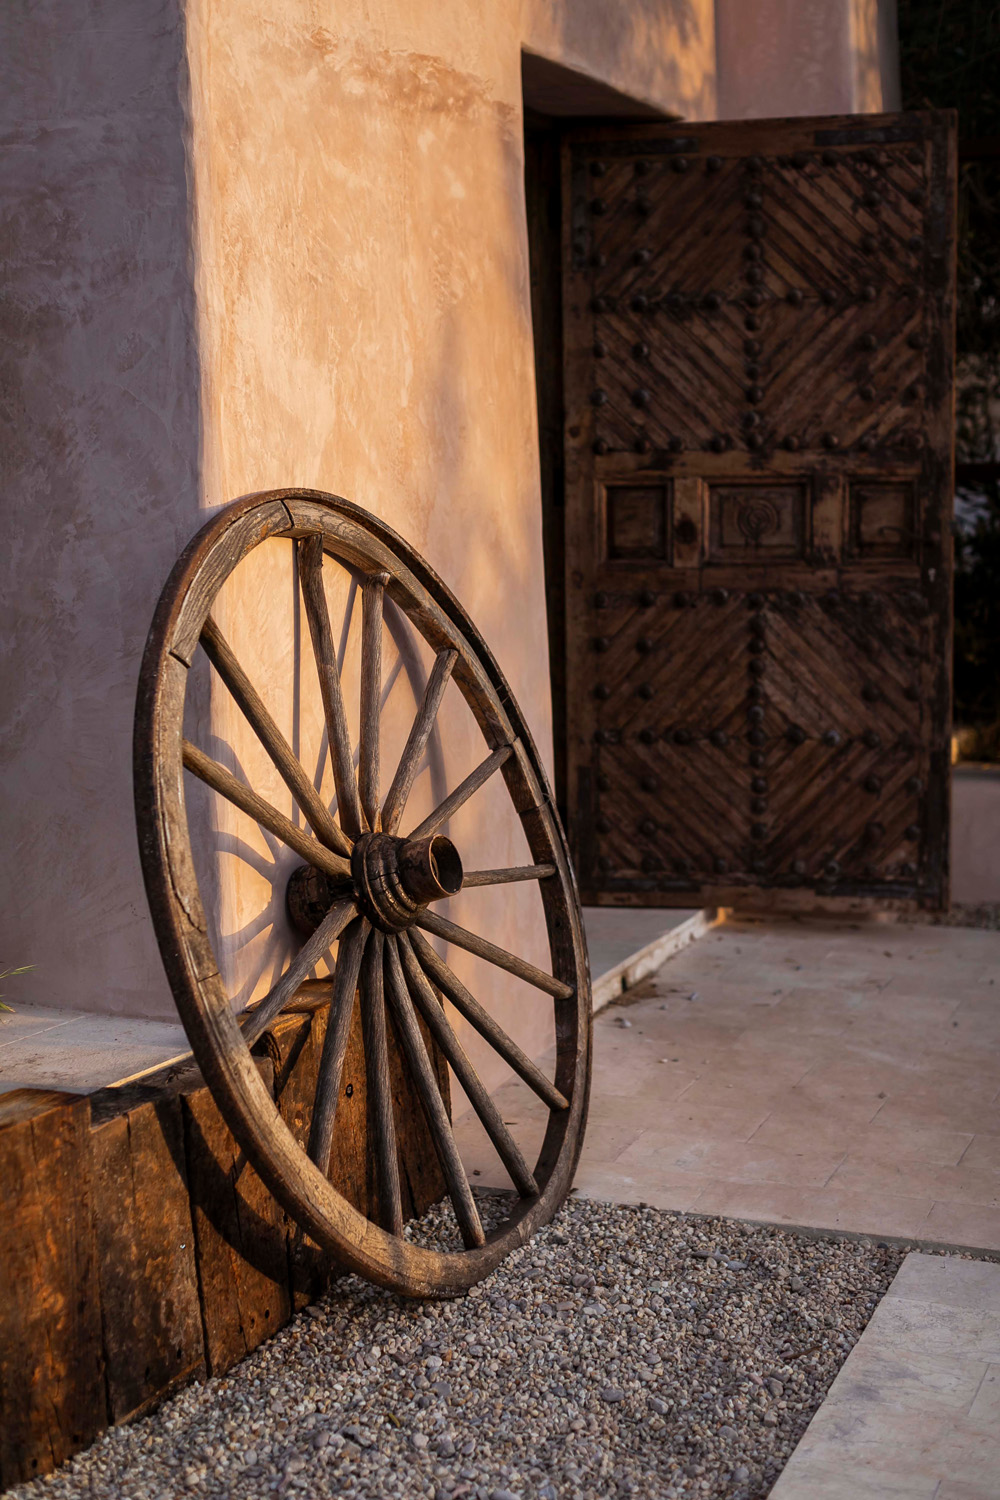 A wagon wheel leaning against the wall of a luxury villa